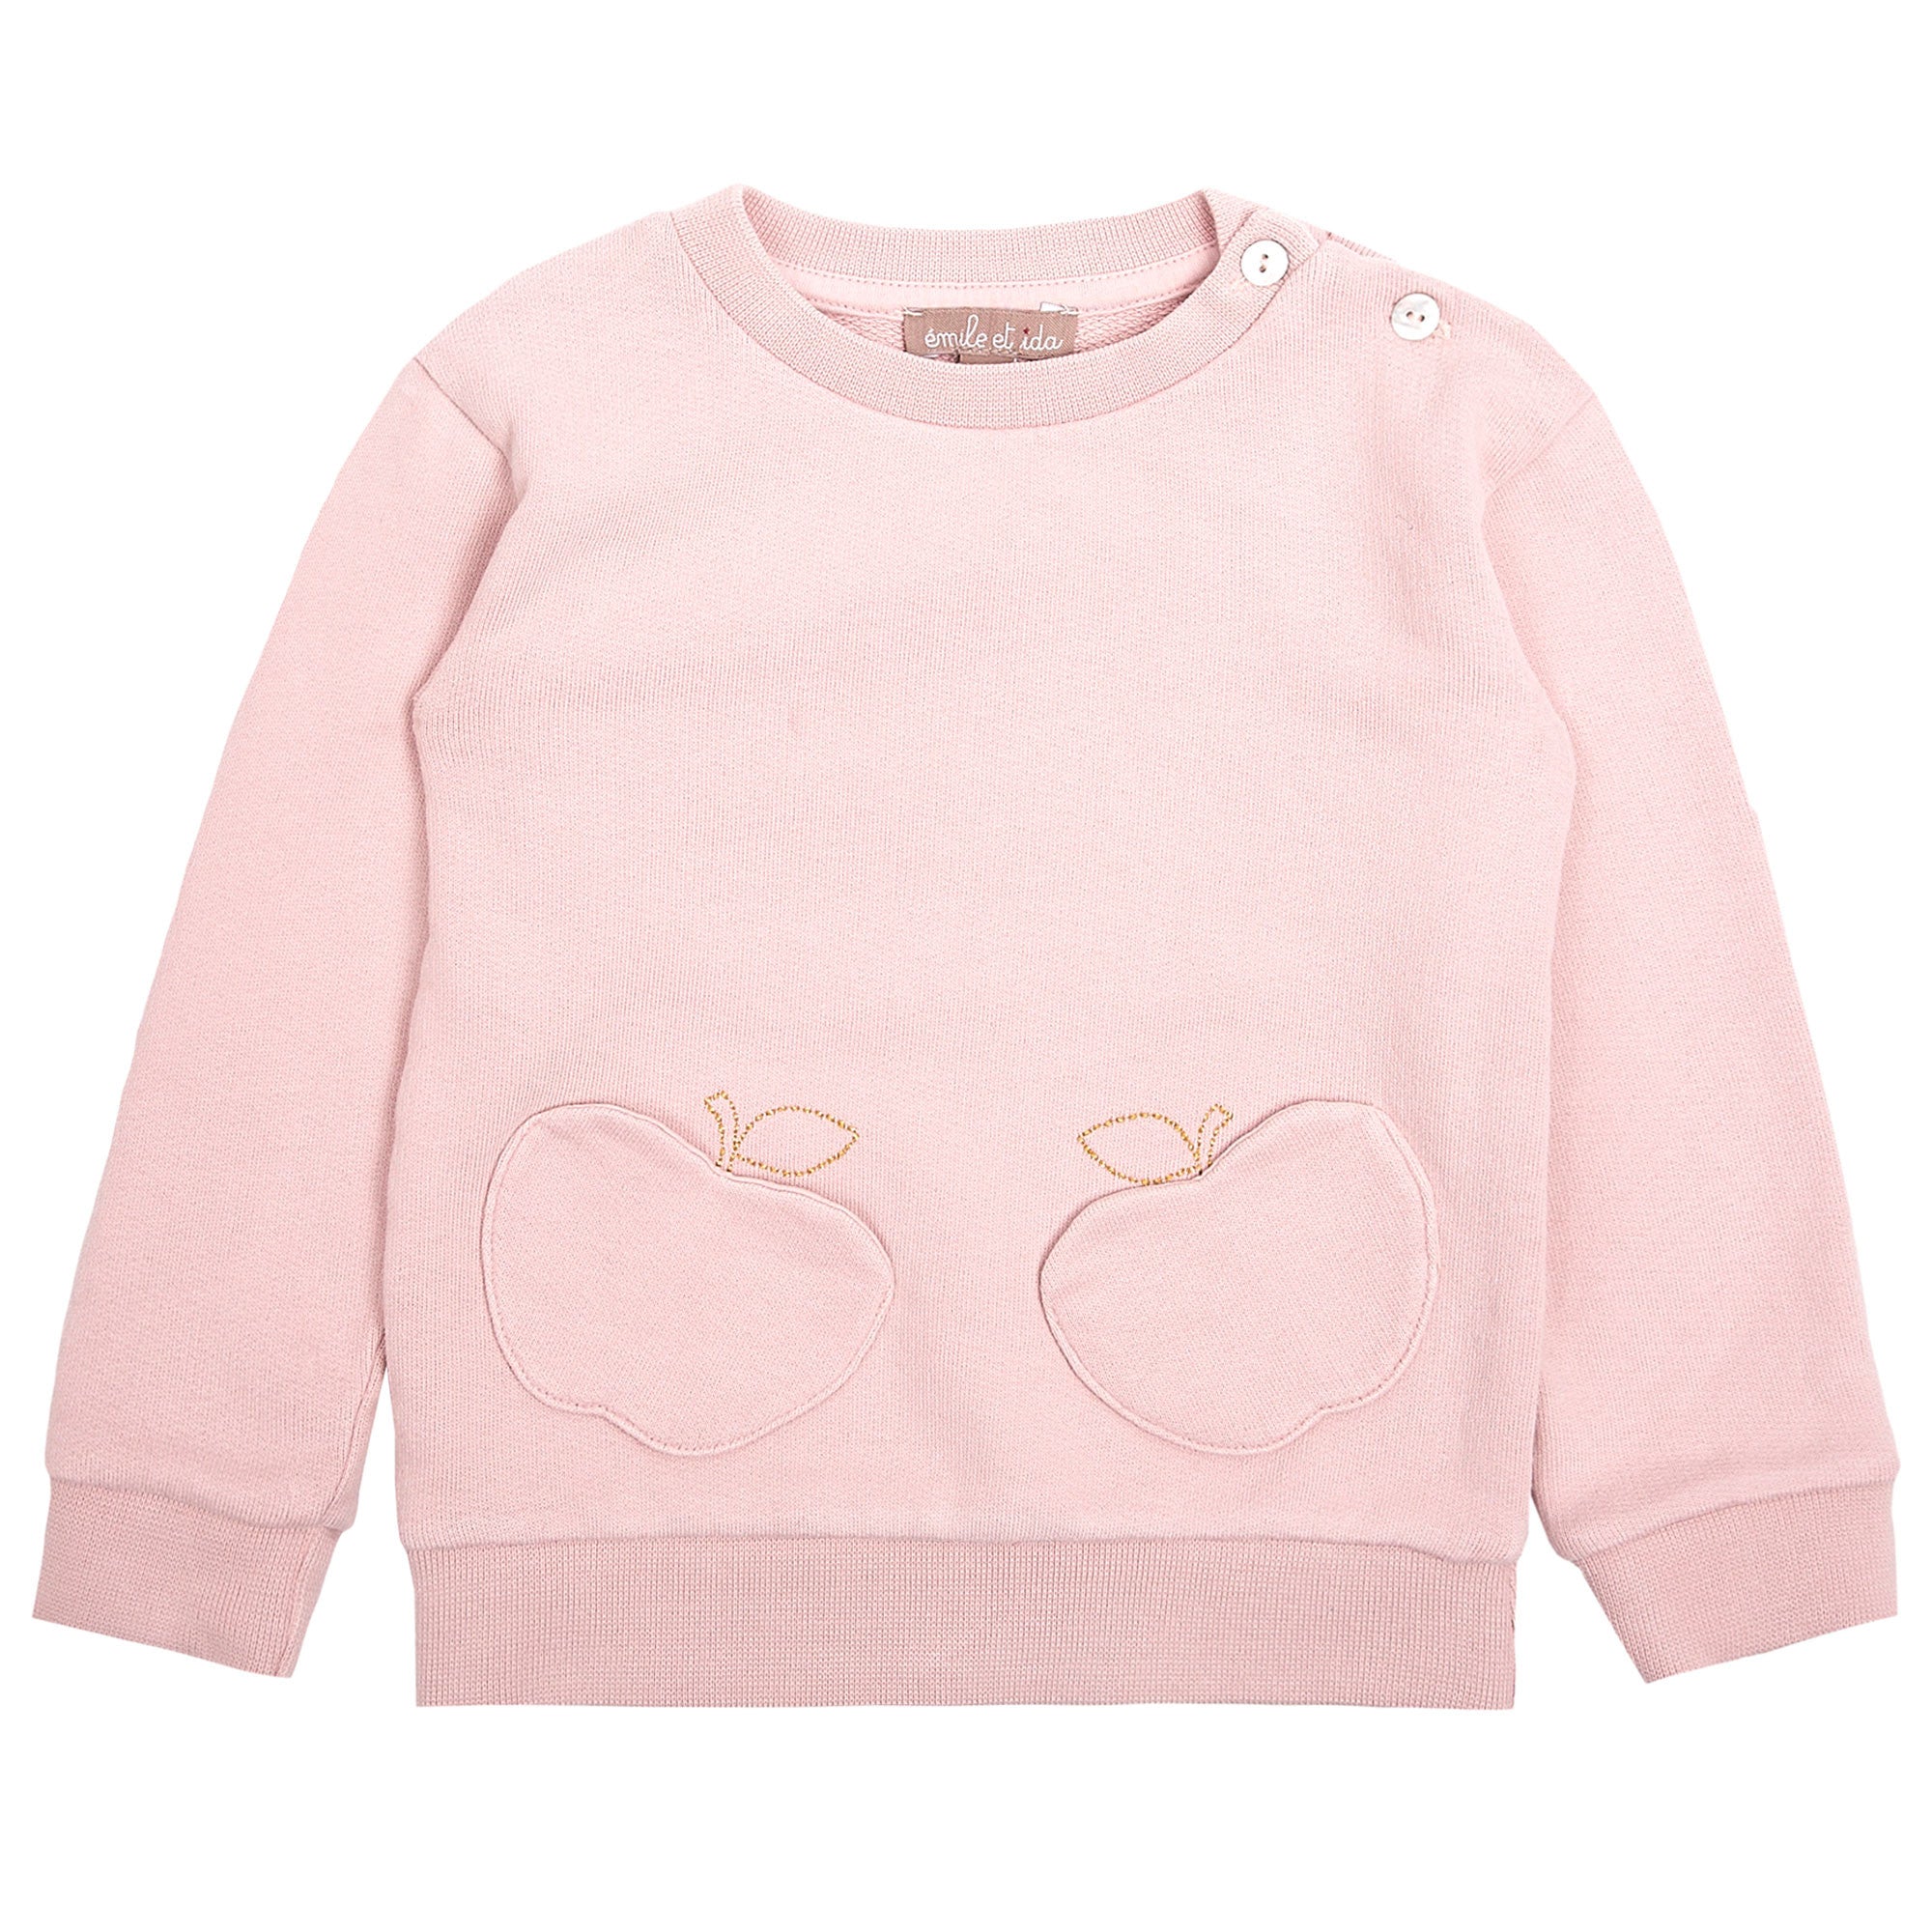 Girls Pink Cotton Sweater With Pocket